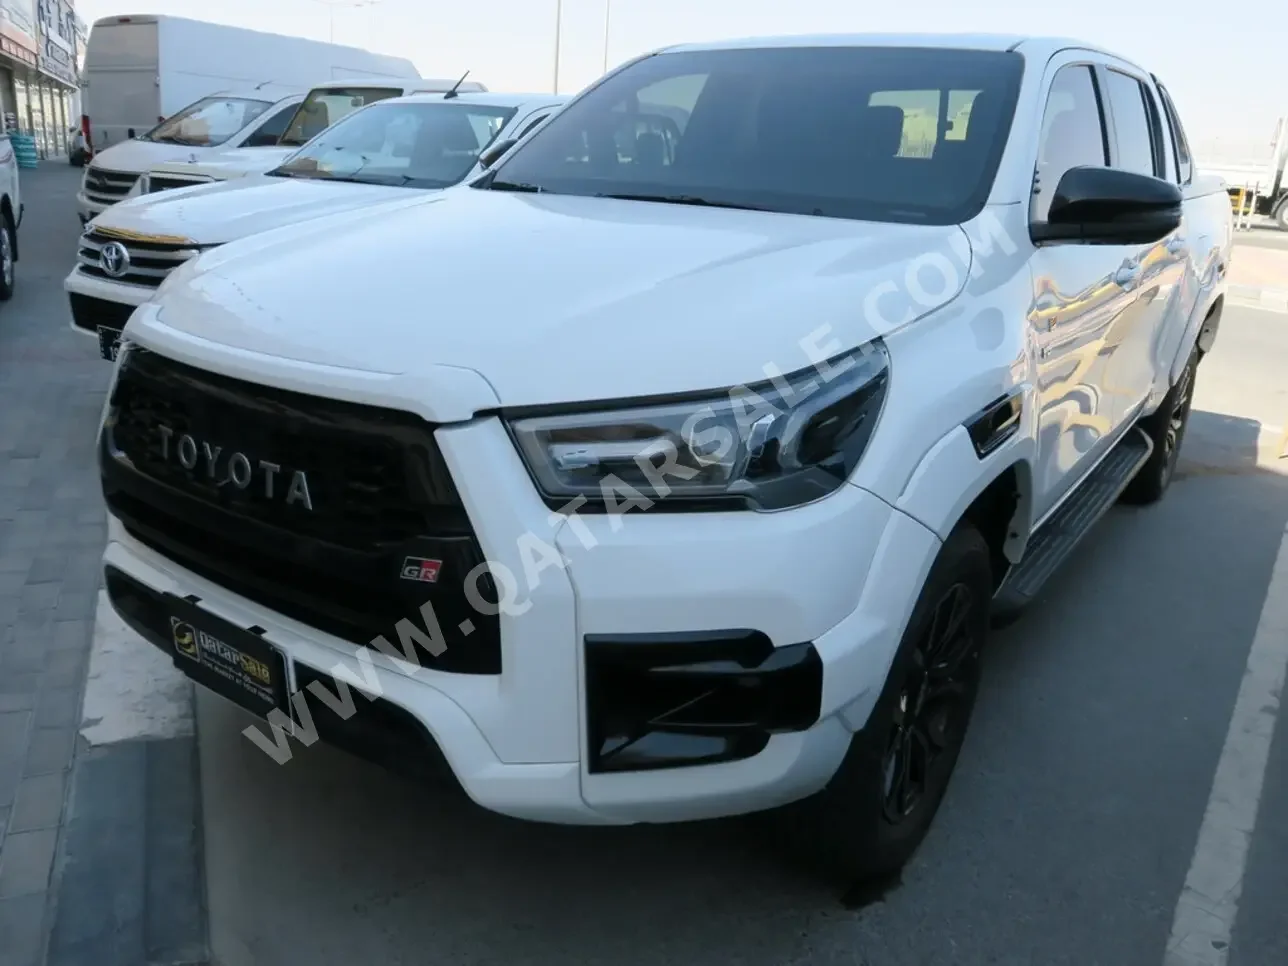 Toyota  Hilux  GR Sport  2023  Automatic  58,000 Km  6 Cylinder  Four Wheel Drive (4WD)  Pick Up  White  With Warranty